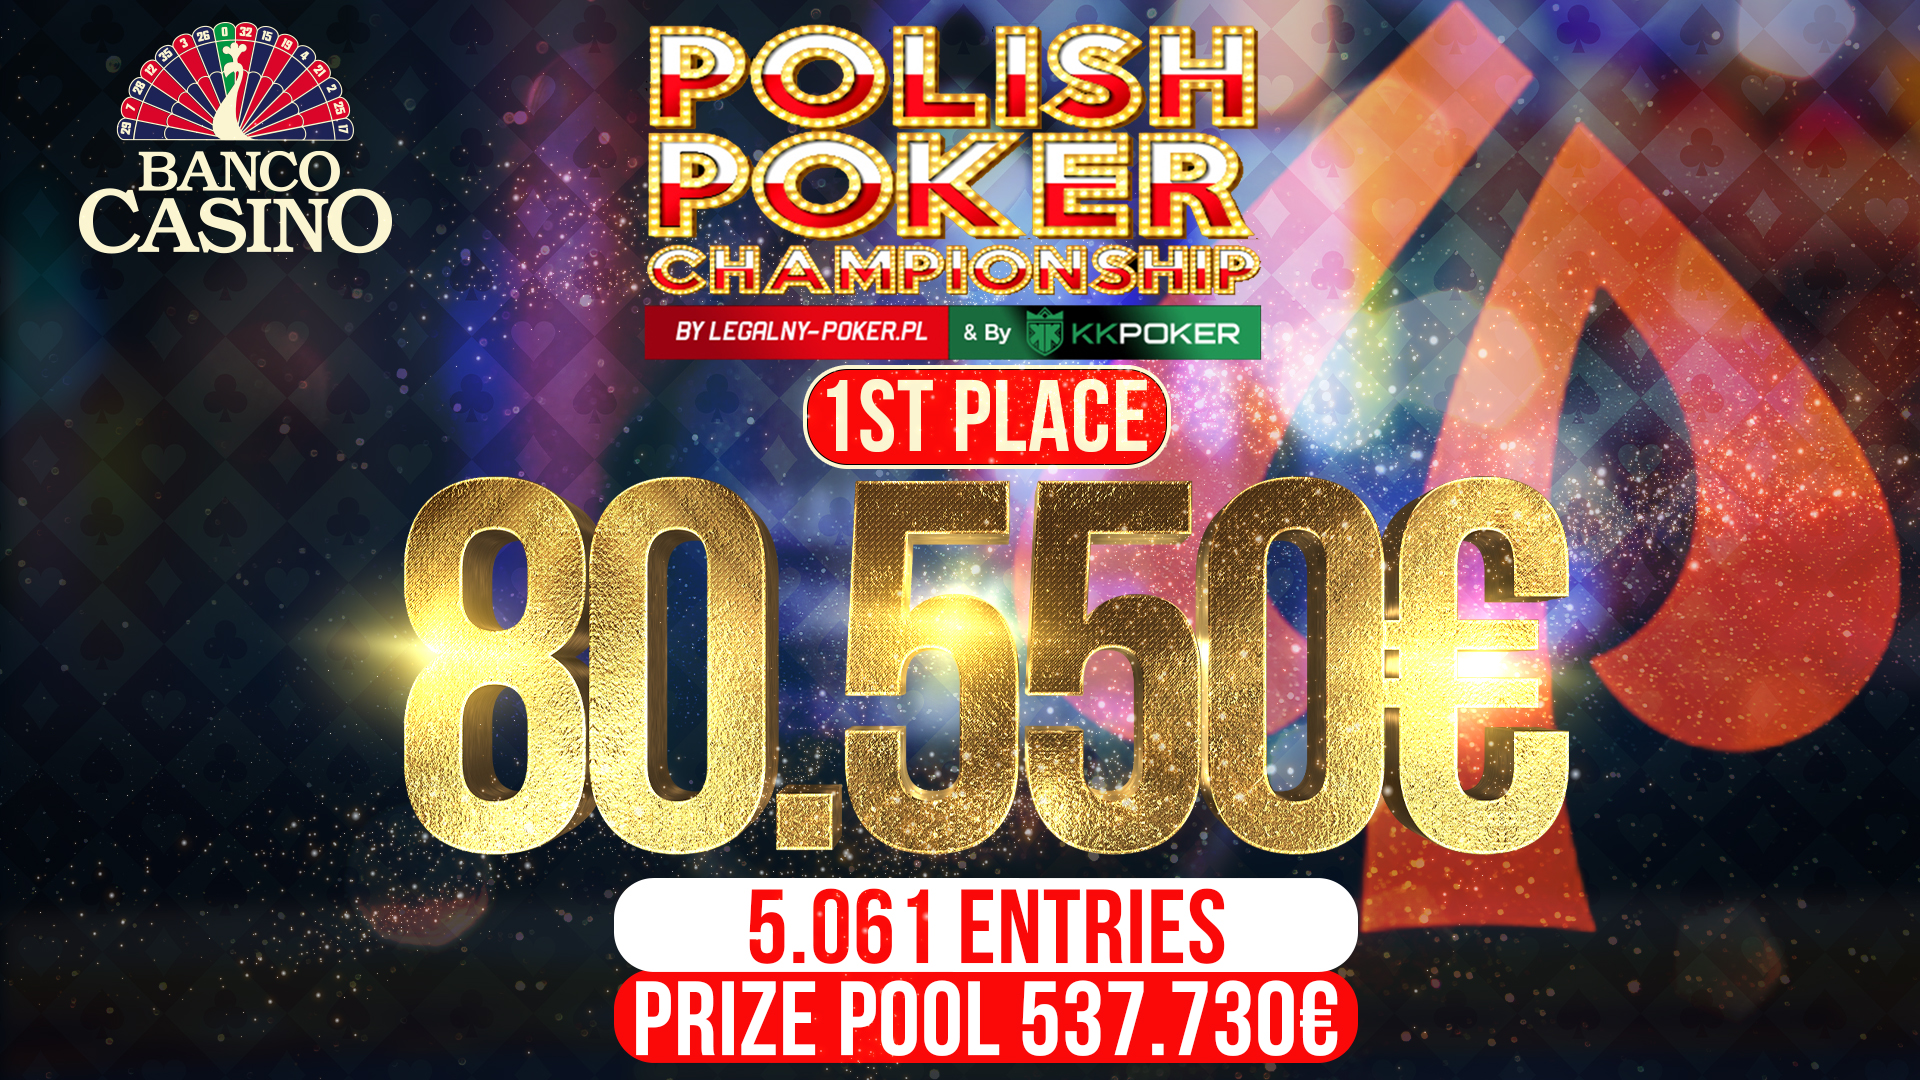 Who will turn 125€ into 80,550€ intended for the champion of the record-breaking PPC Main Event with a 537,730€ prize pool?